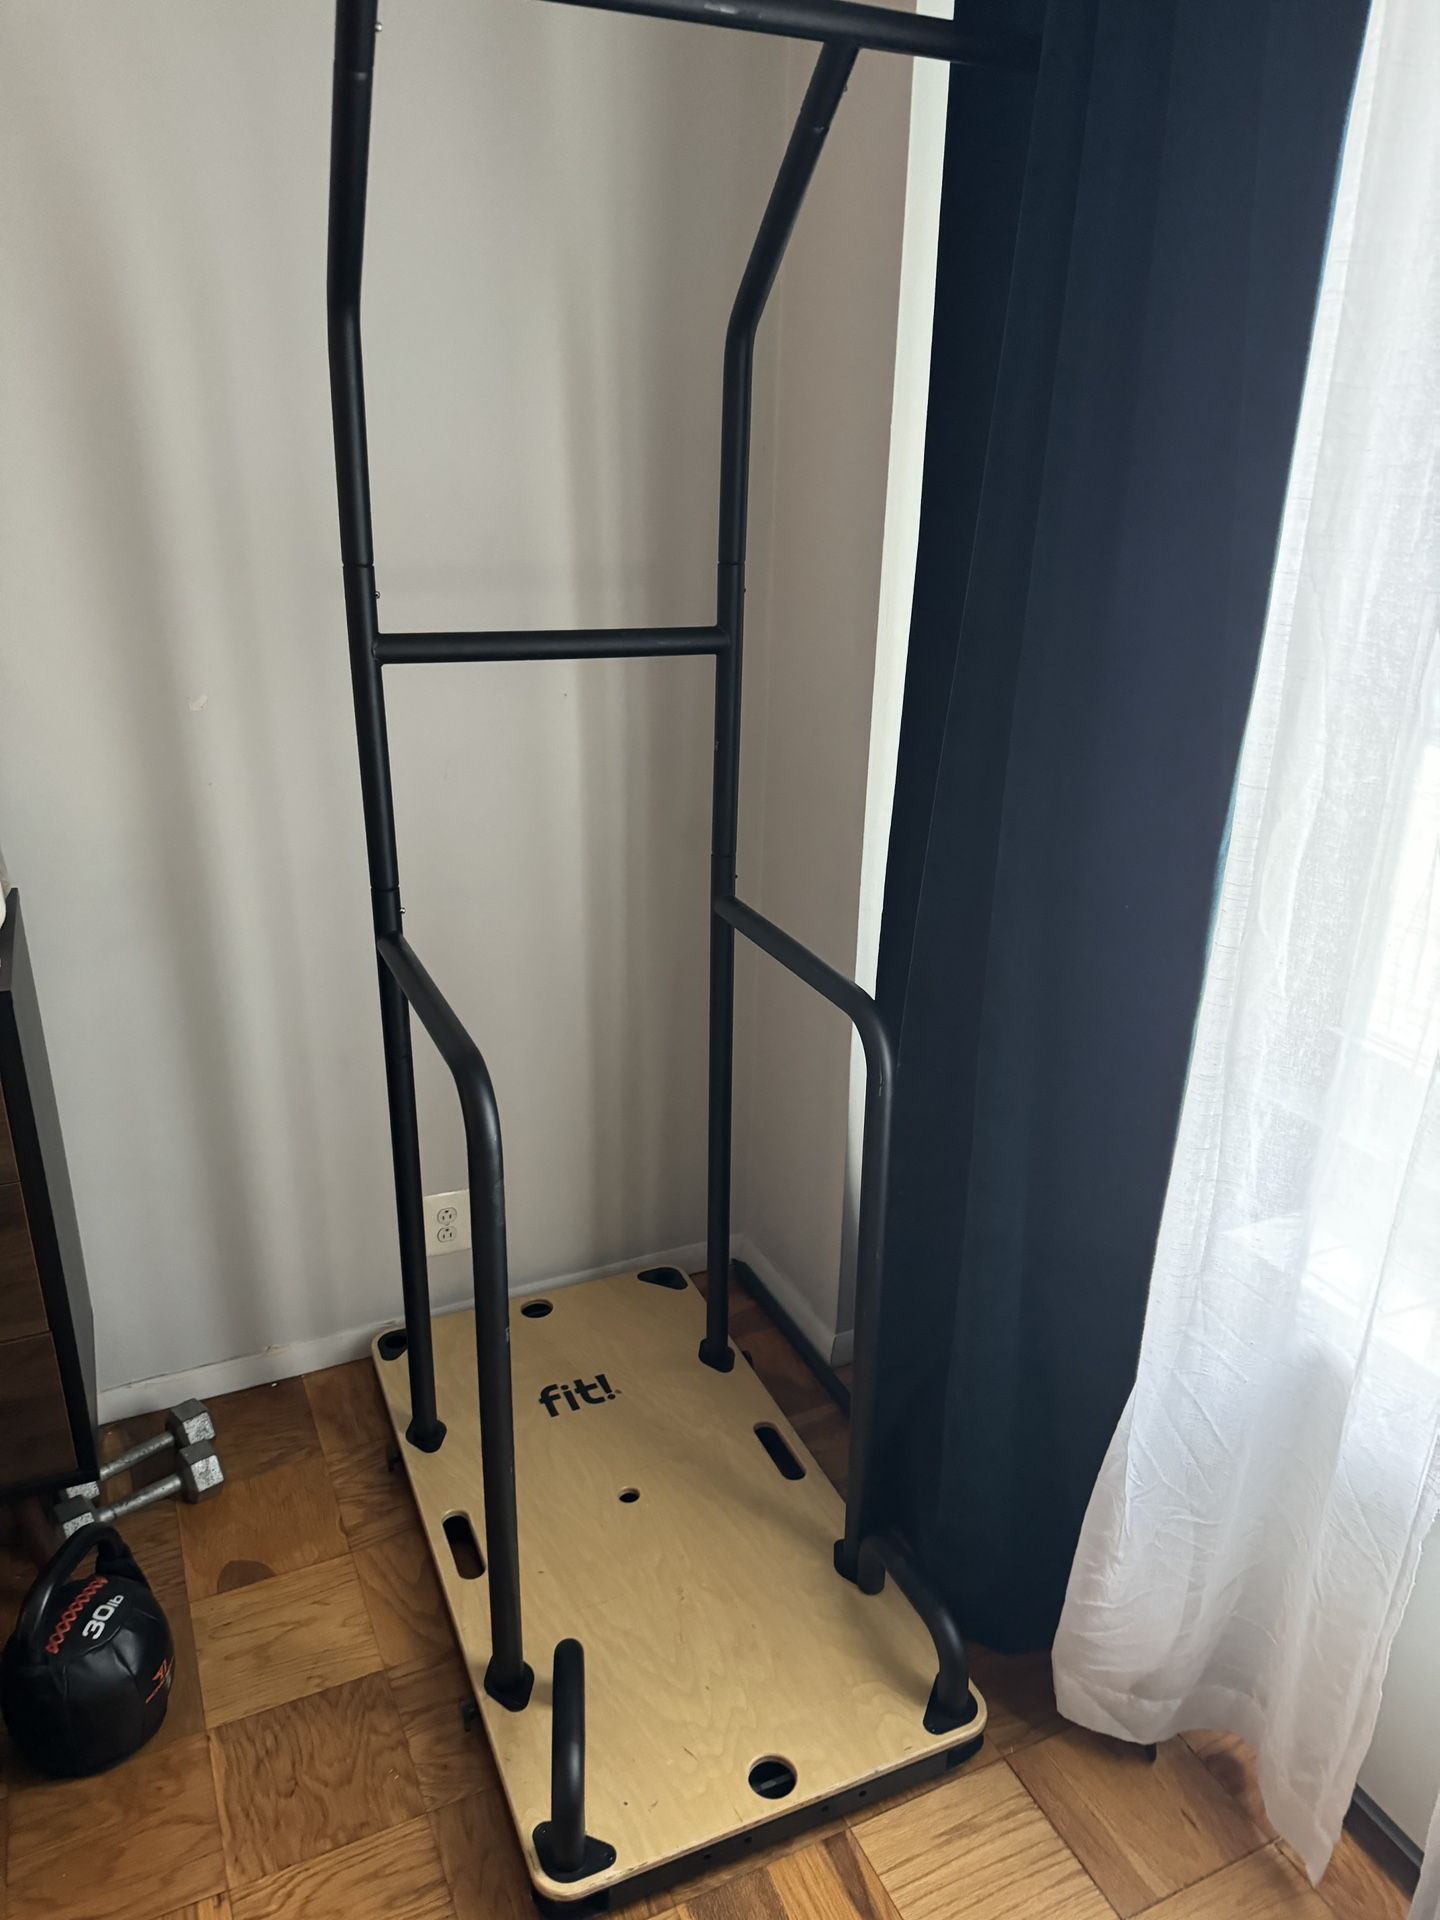 Fit! Home Gym